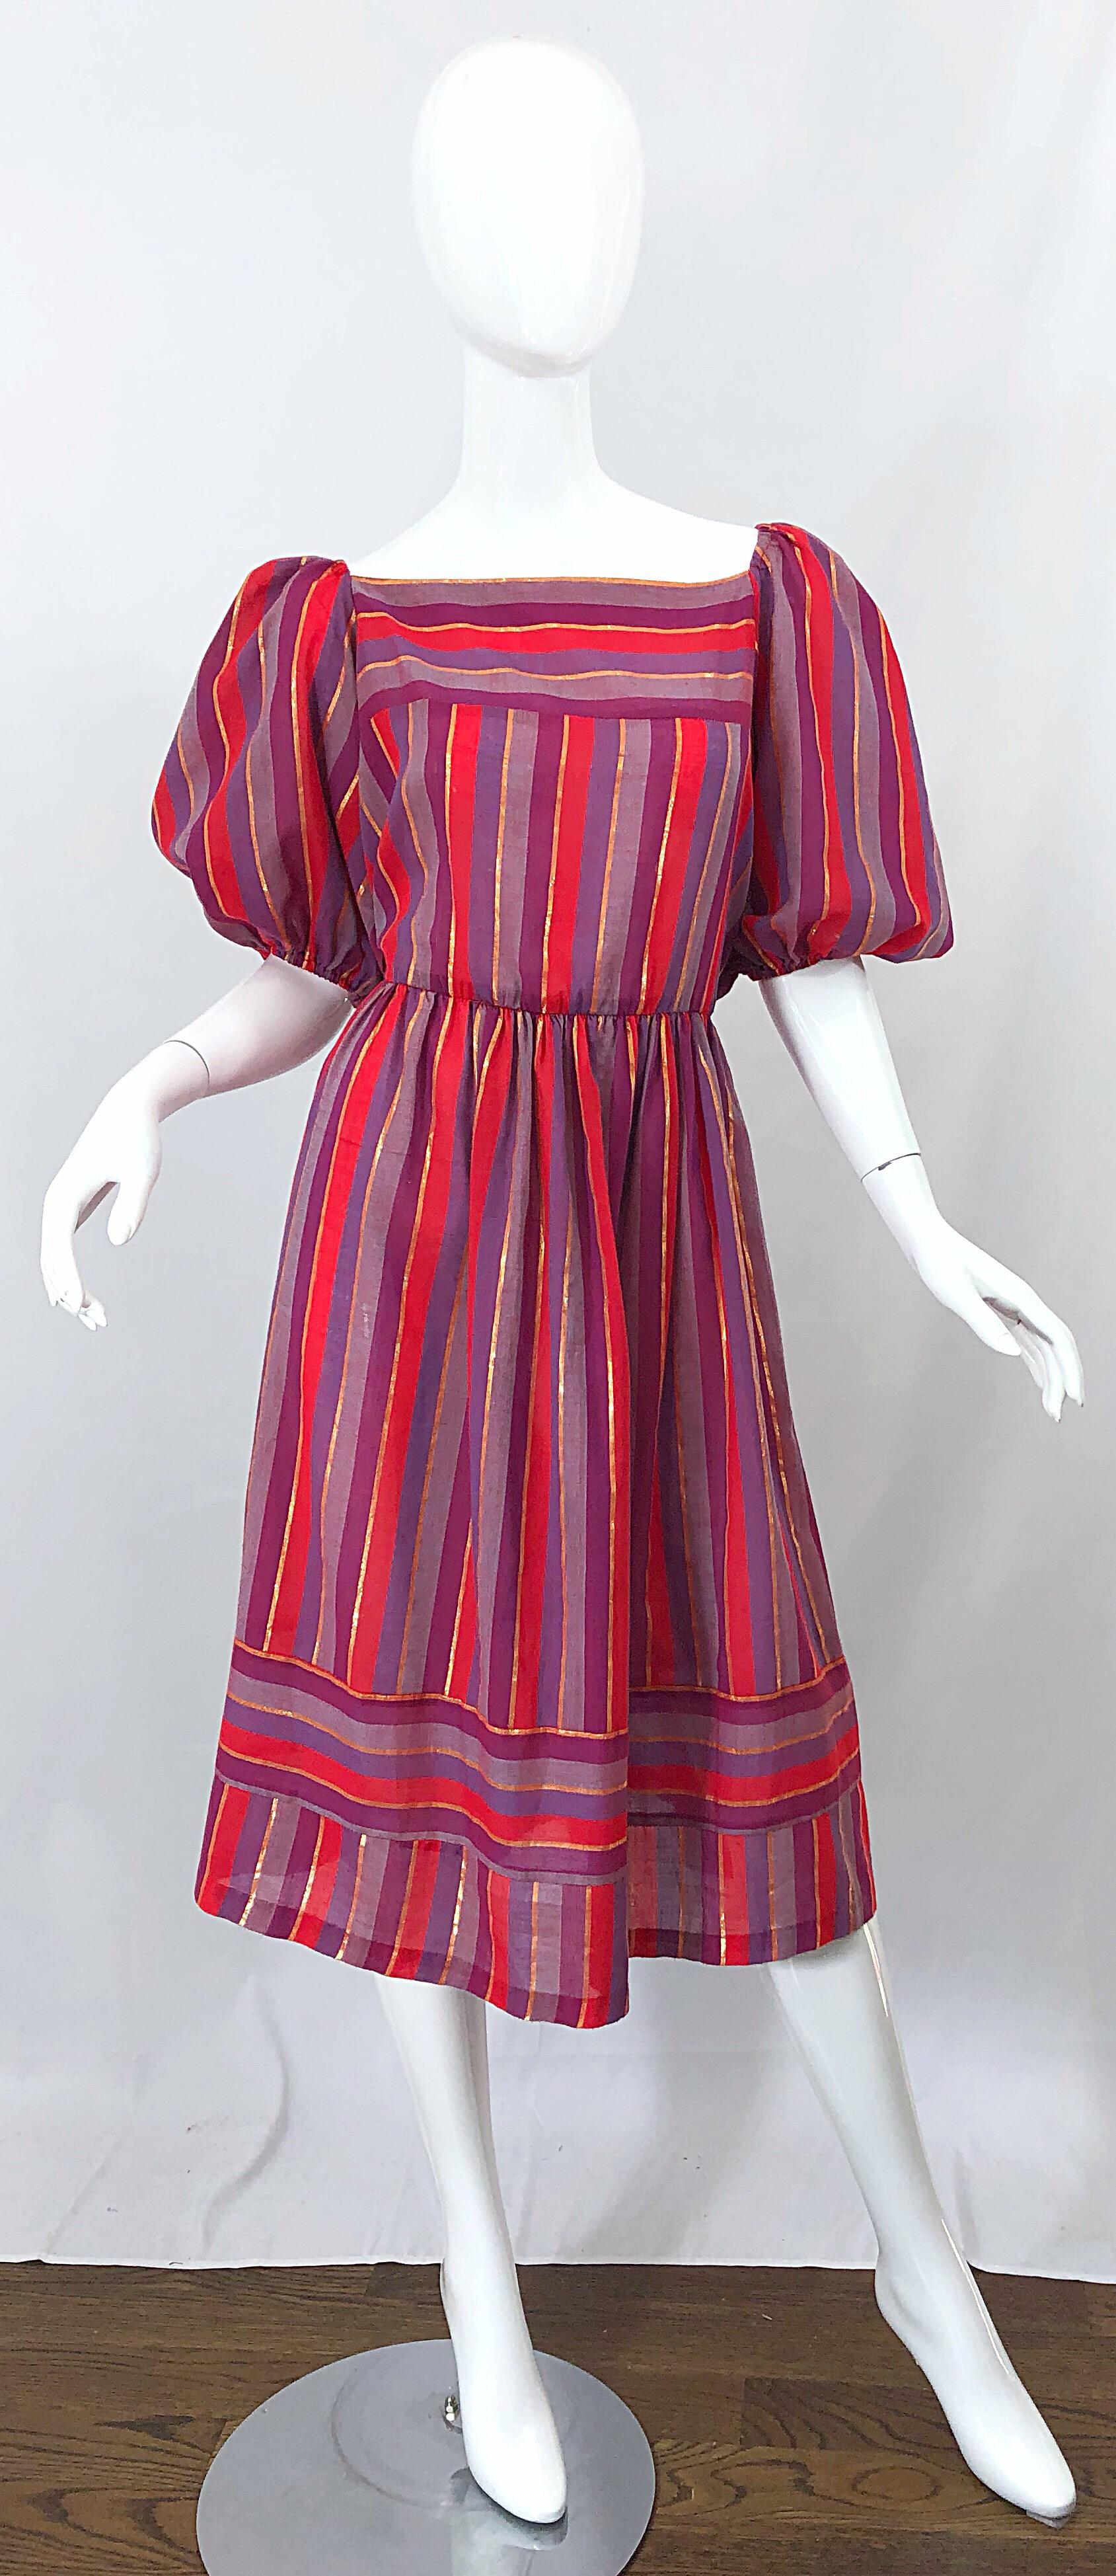 Boho chic 1970s red, purple lilac and metallic gold vertically striped dress! Features chic short puff sleeves. Elastic waistband makes this beauty easy to wear and comfortable. Lightweight cotton voile blend is perfect for any time of year. Hidden